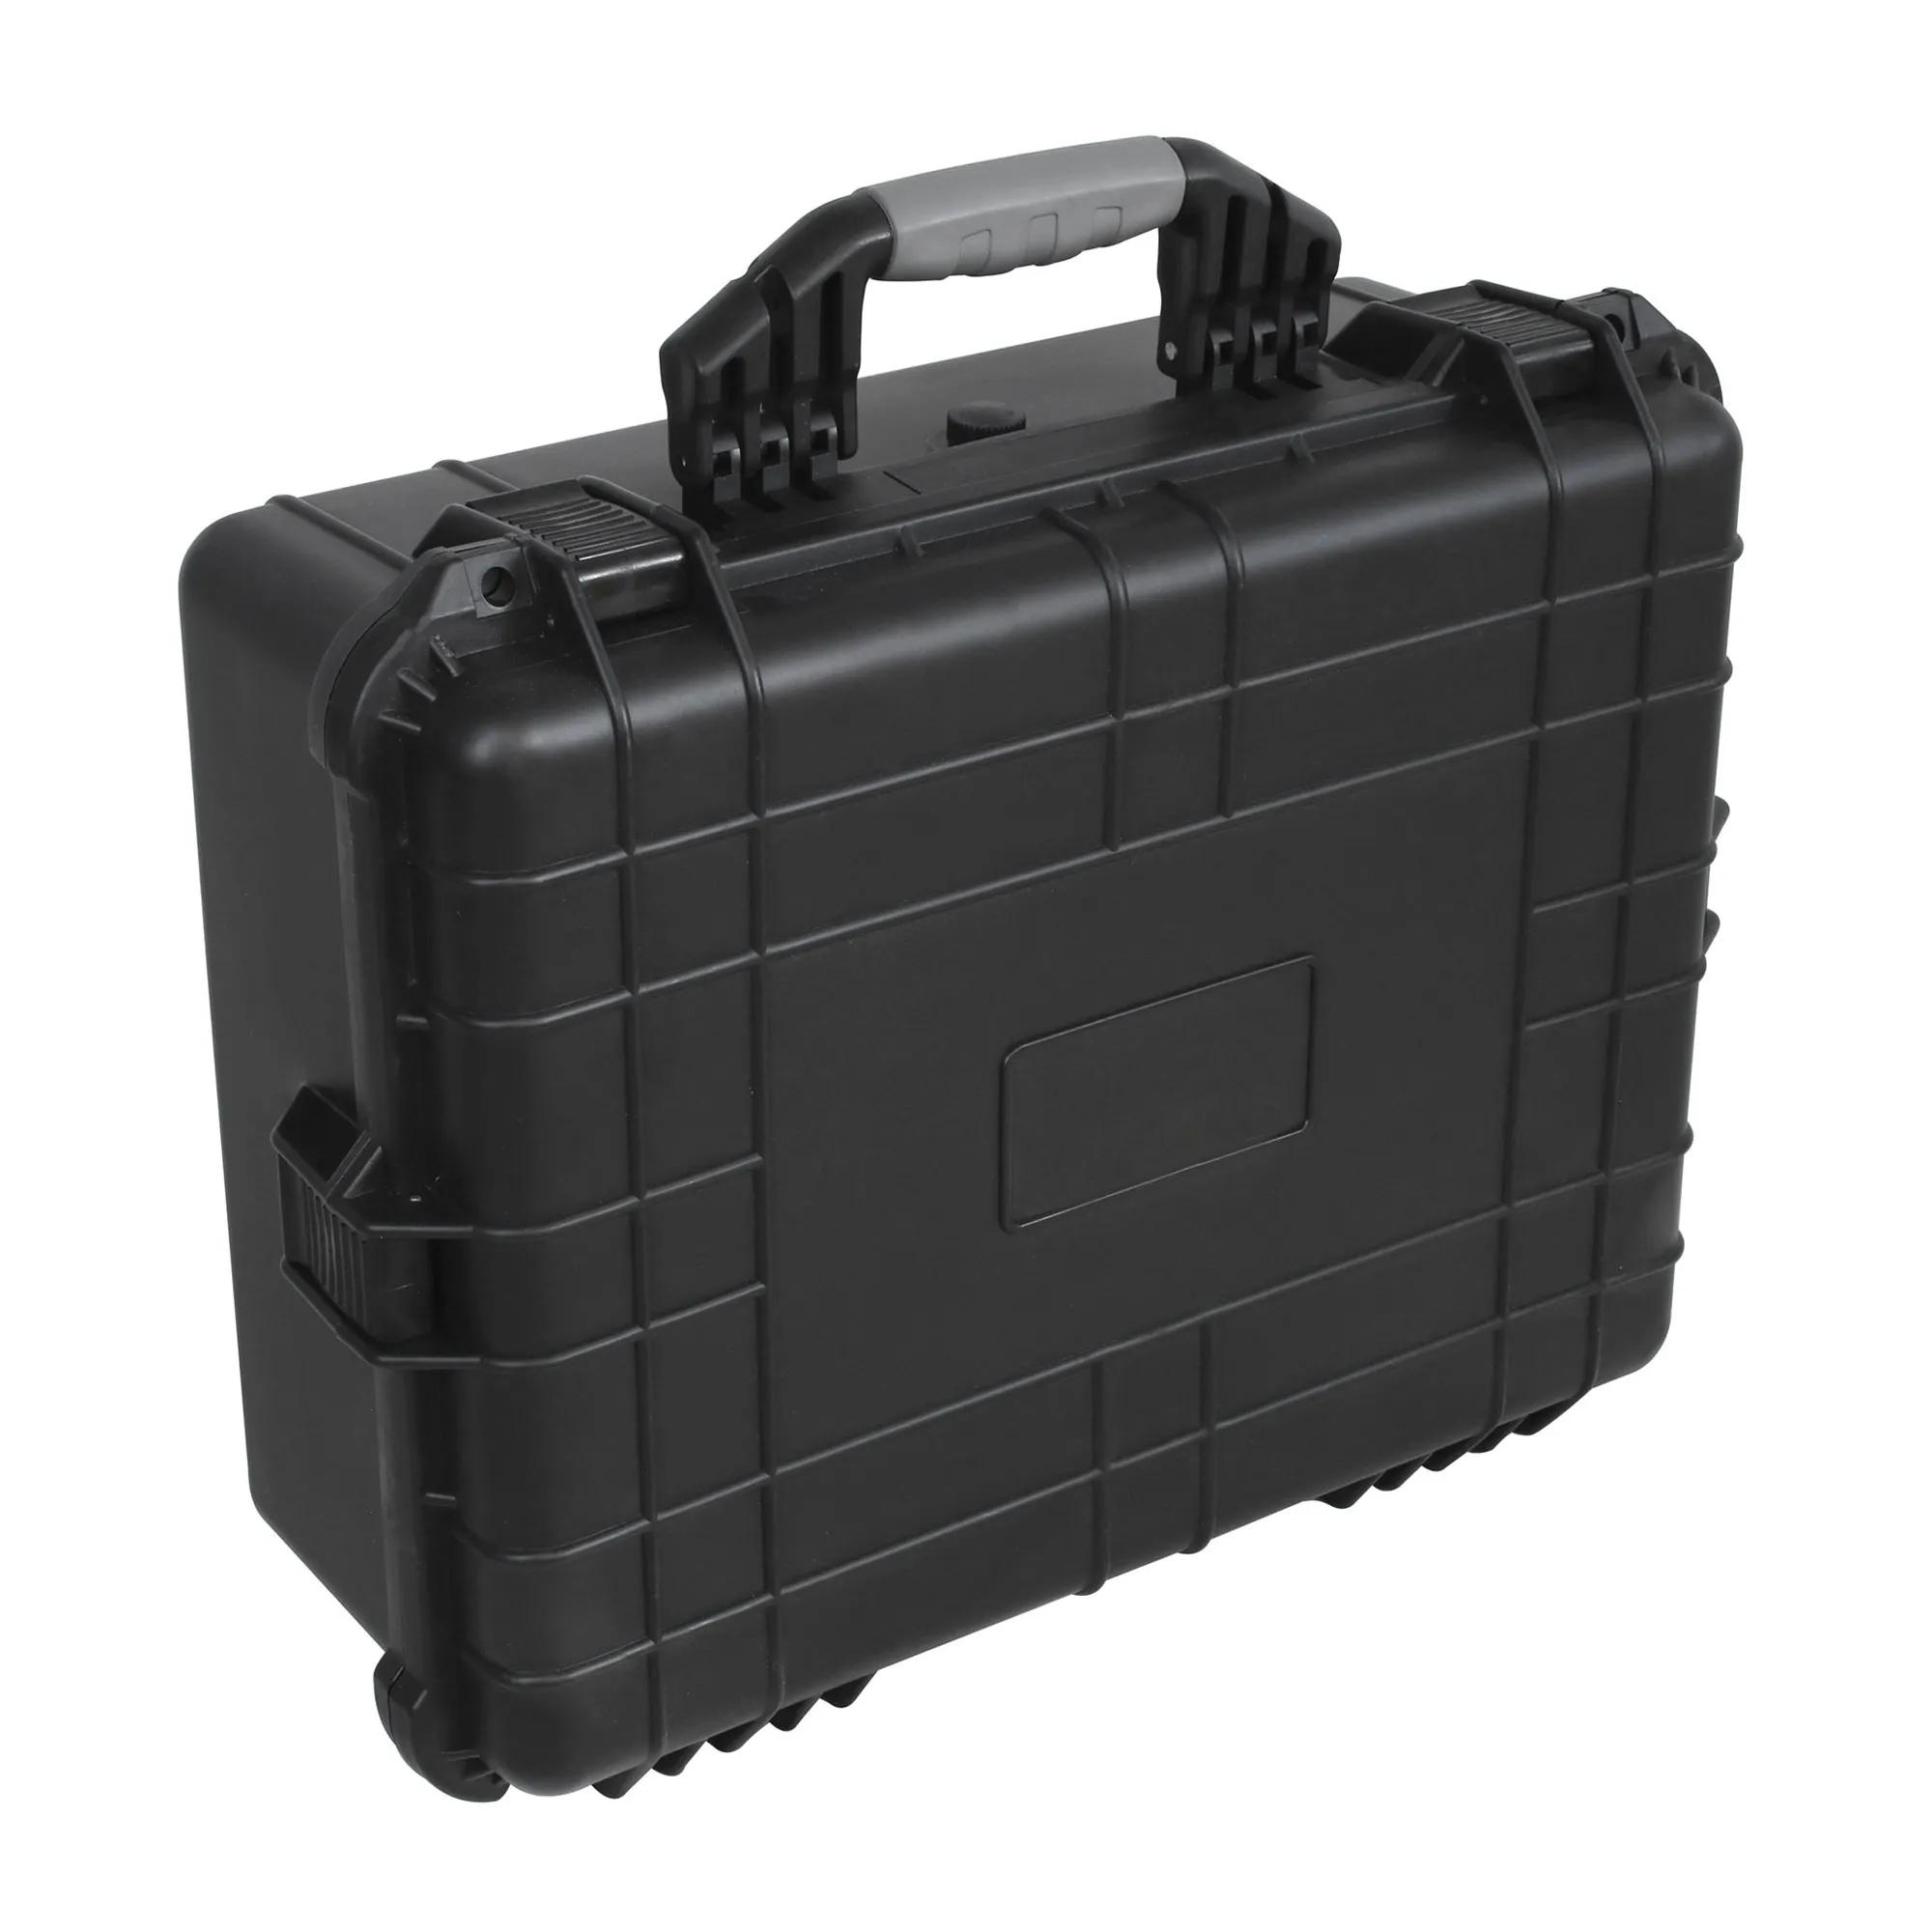 Hard shell 2pcs rugged waterproof case black carry toolbox safety protective case